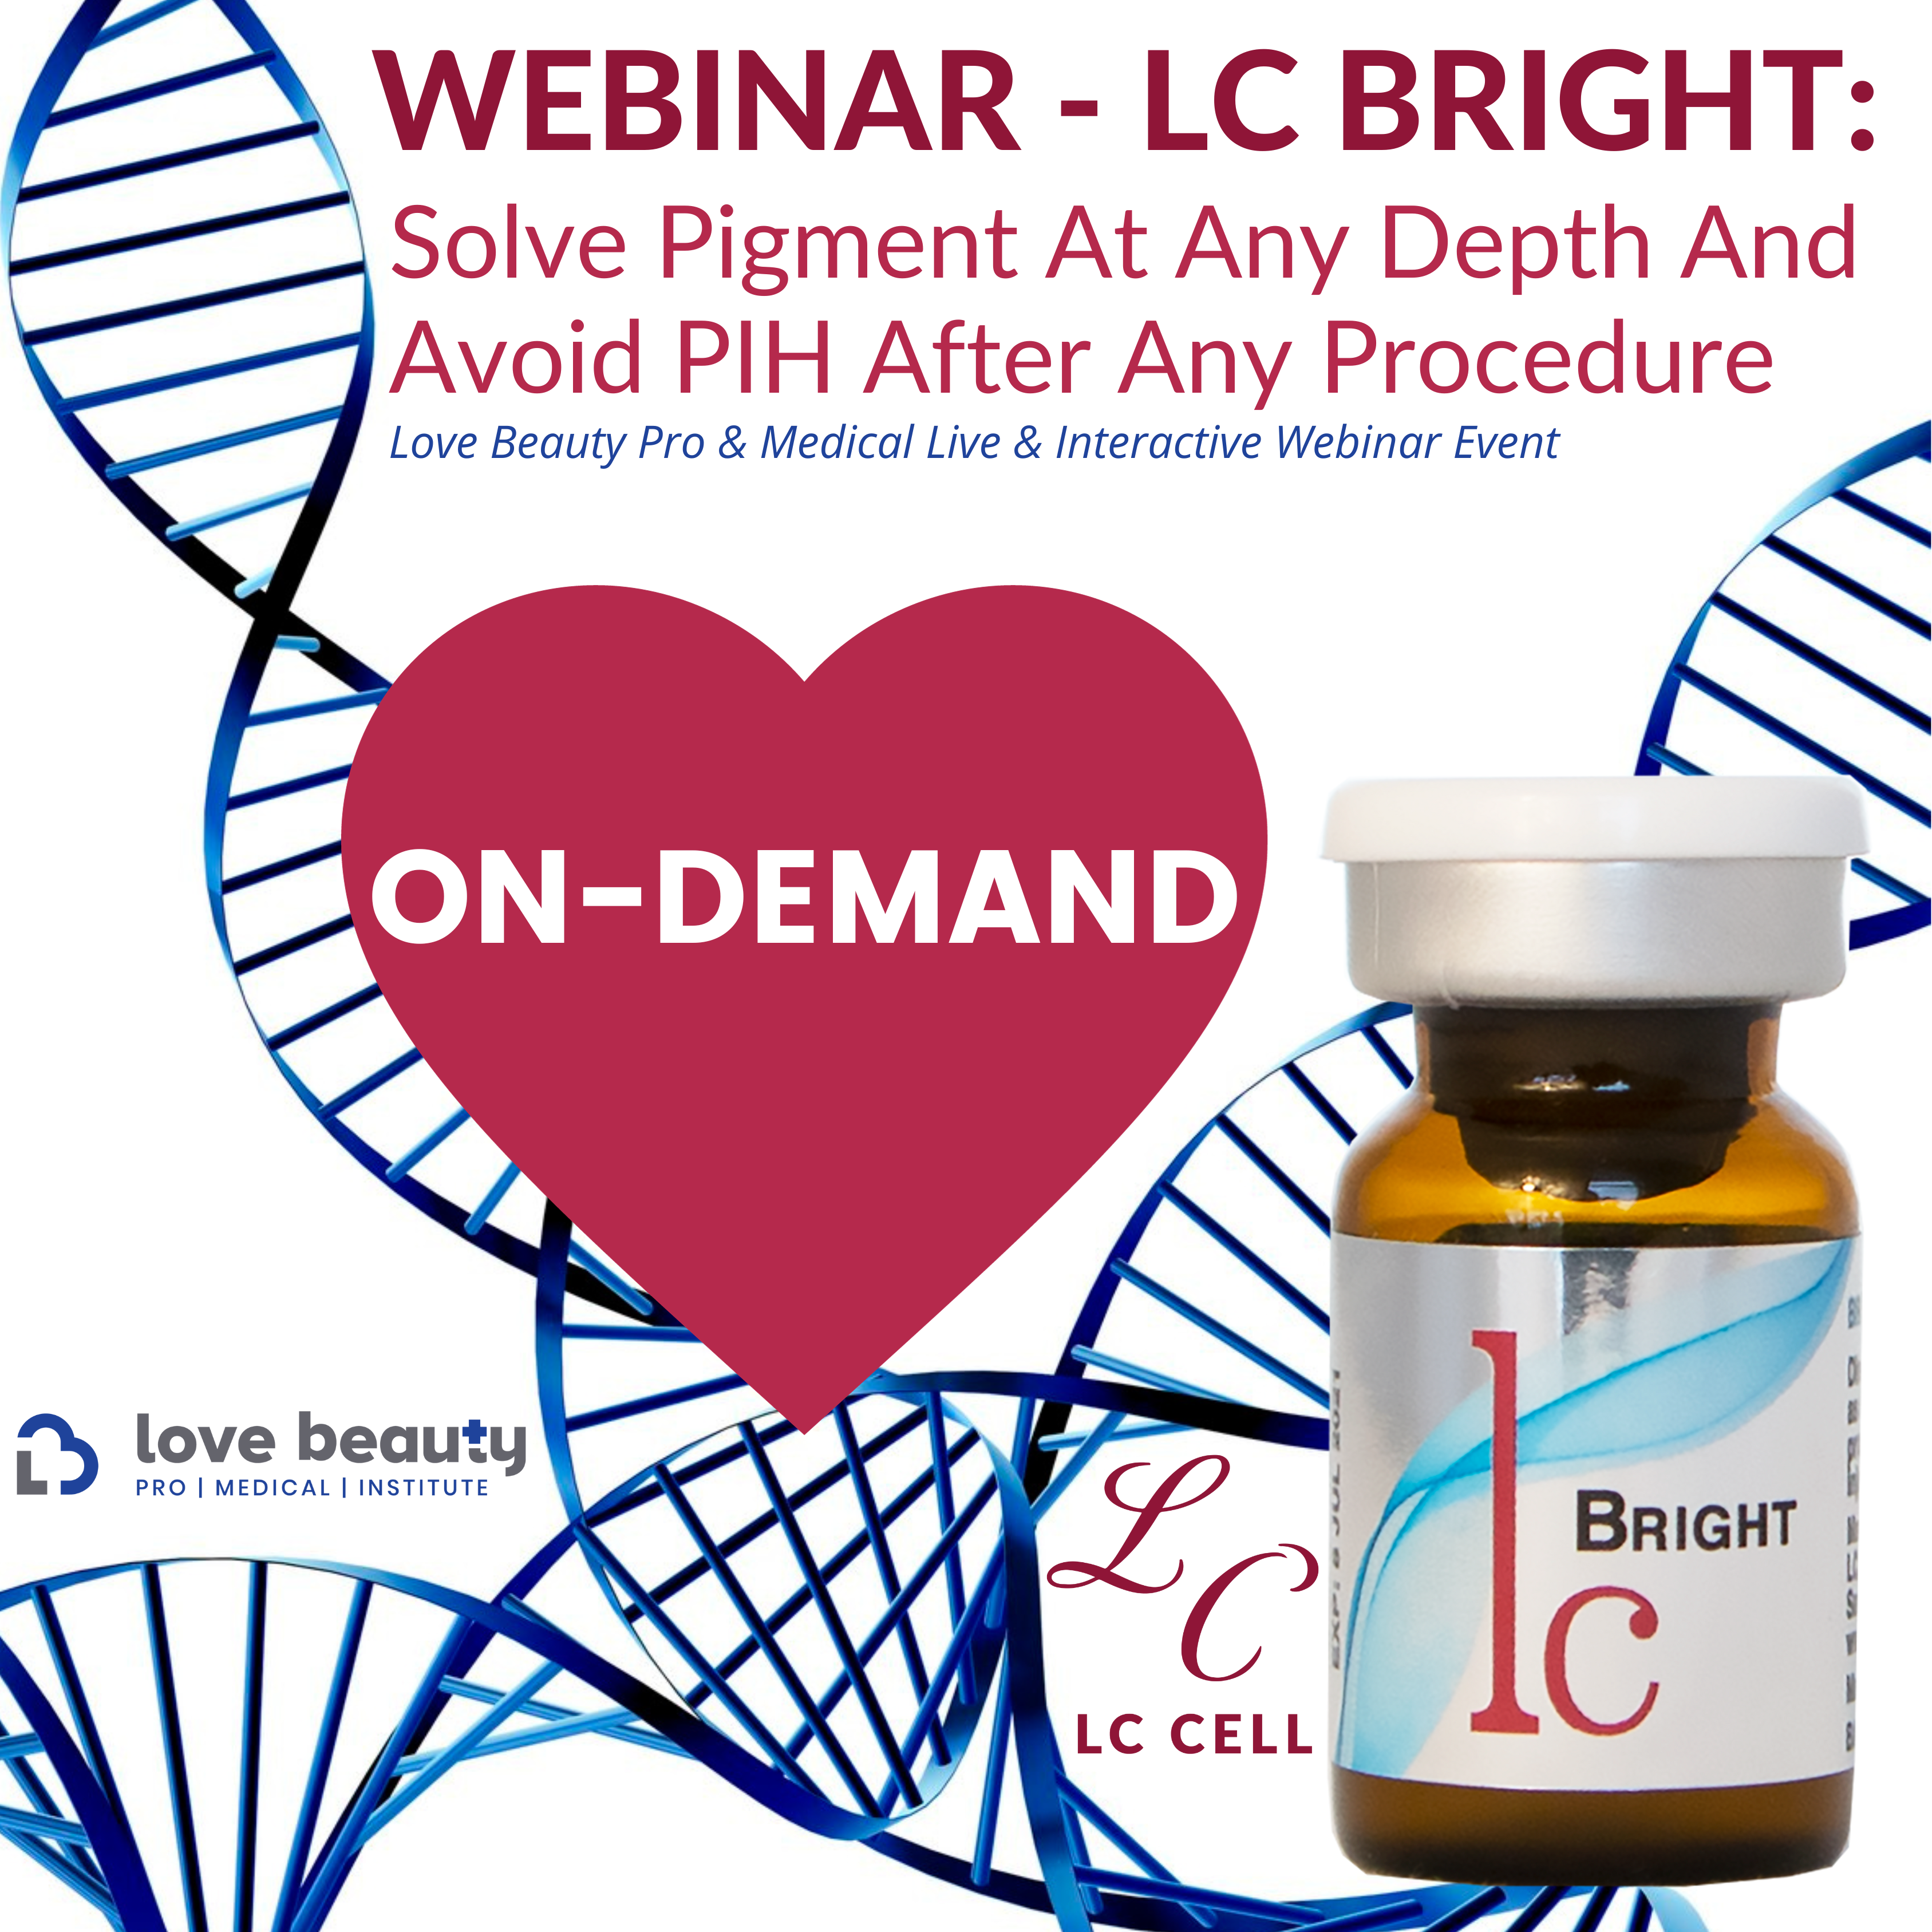 ON-DEMAND WEBINAR - LC Bright Solve Pigment at Any Depth and Avoid PIH After Any Procedure